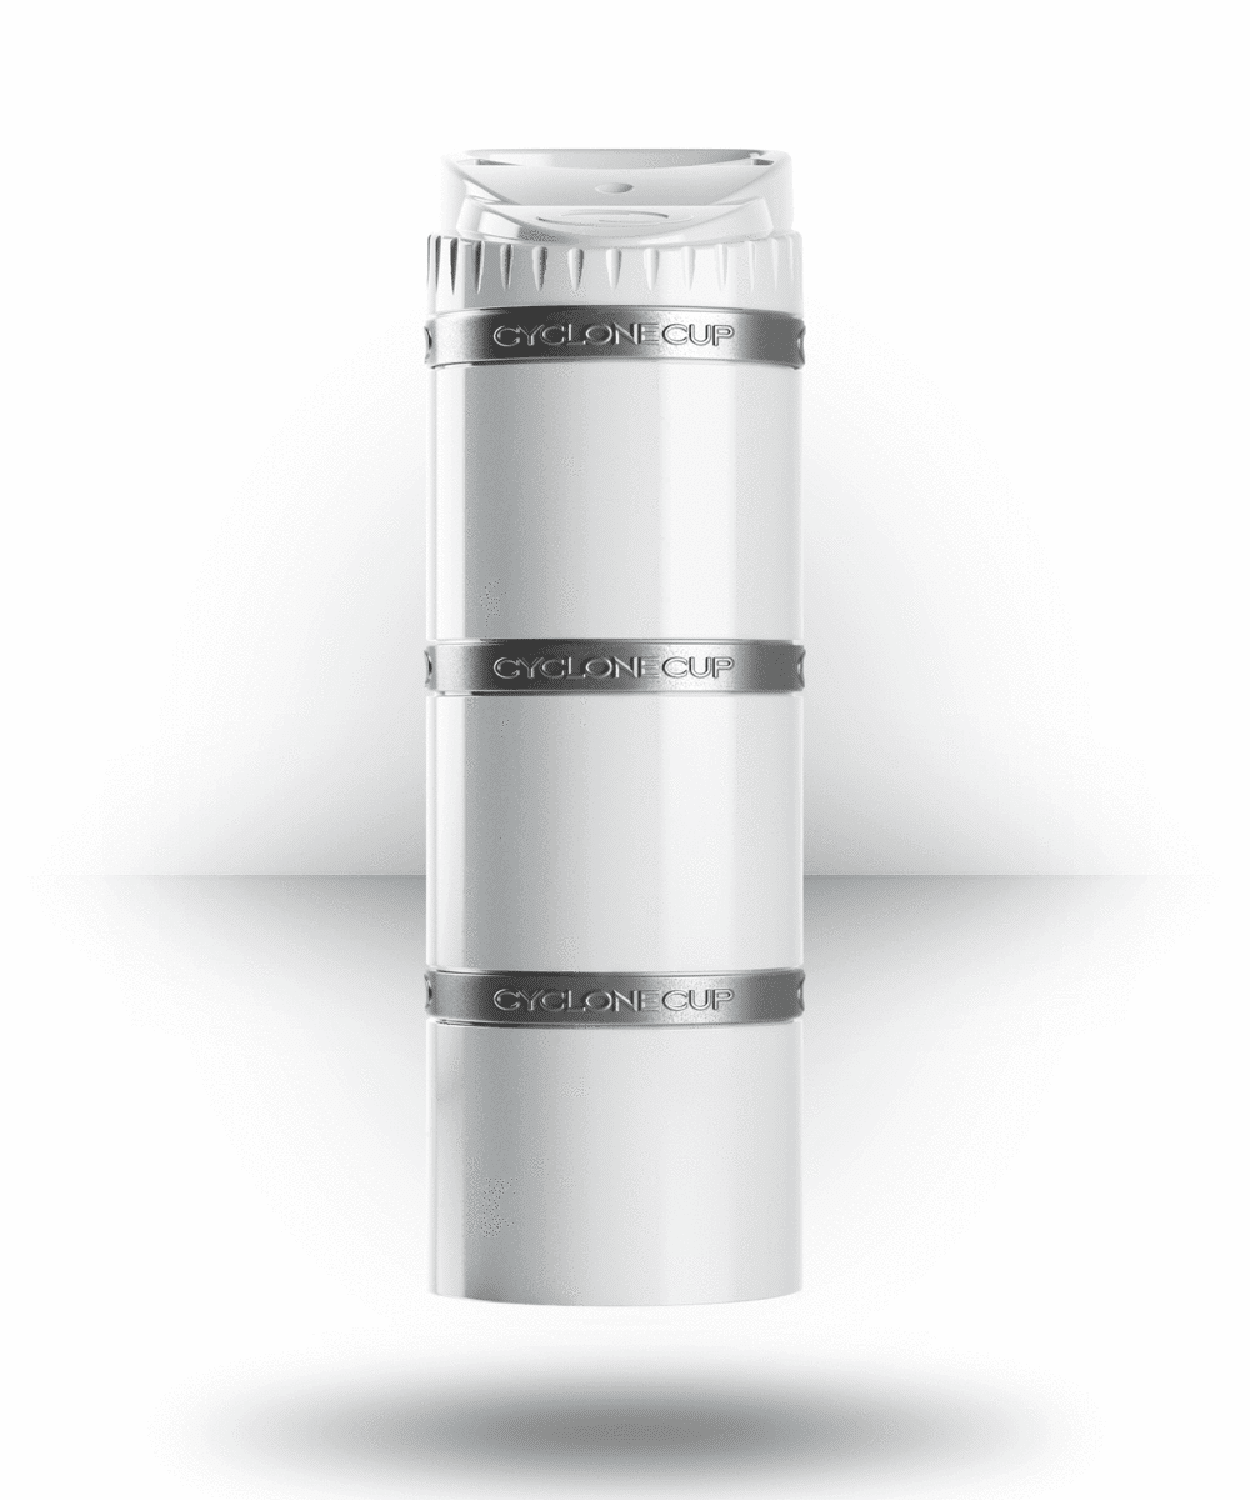 https://www.musclebox.me/wp-content/uploads/2018/06/Cyclone-Cup-Shaker-Core-White.png